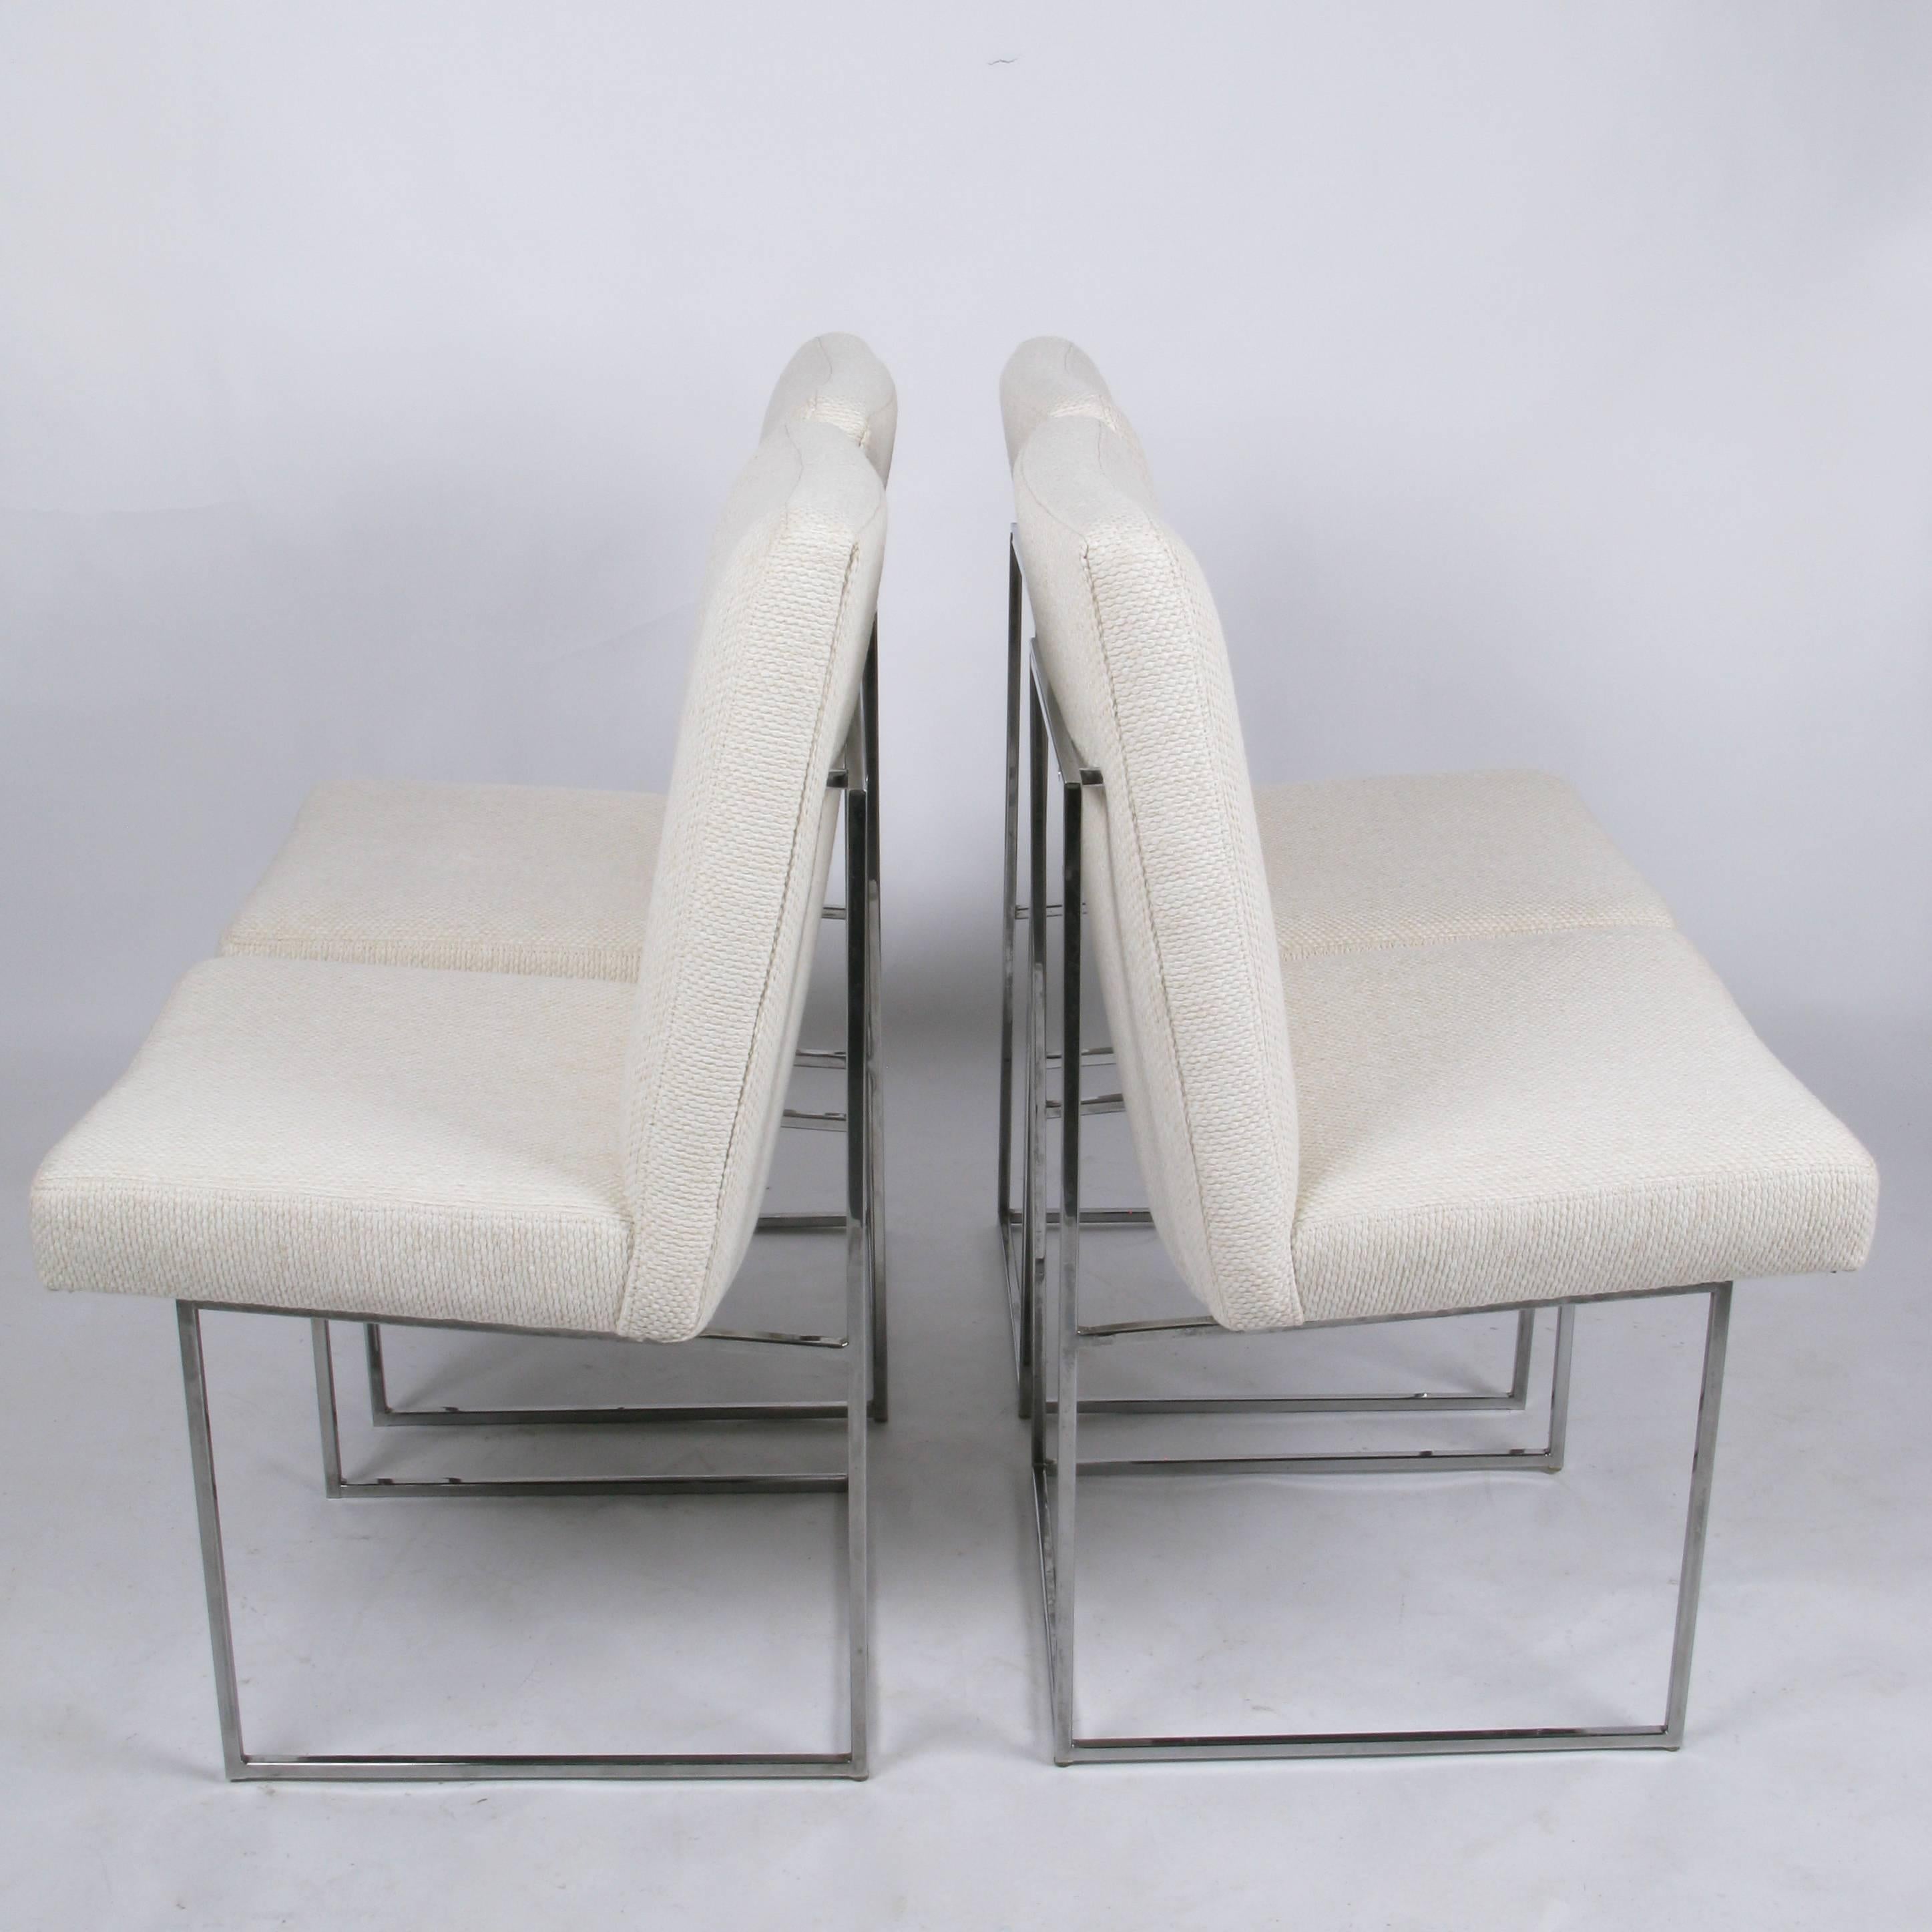 Elegant set of six, two-arm and four side, chairs with chrome frame and new thick weave warm white upholstery designed by Milo Baughman for Thayer Coggin, circa 1969. Simple, clean lined designed would work beautifully with many table styles.